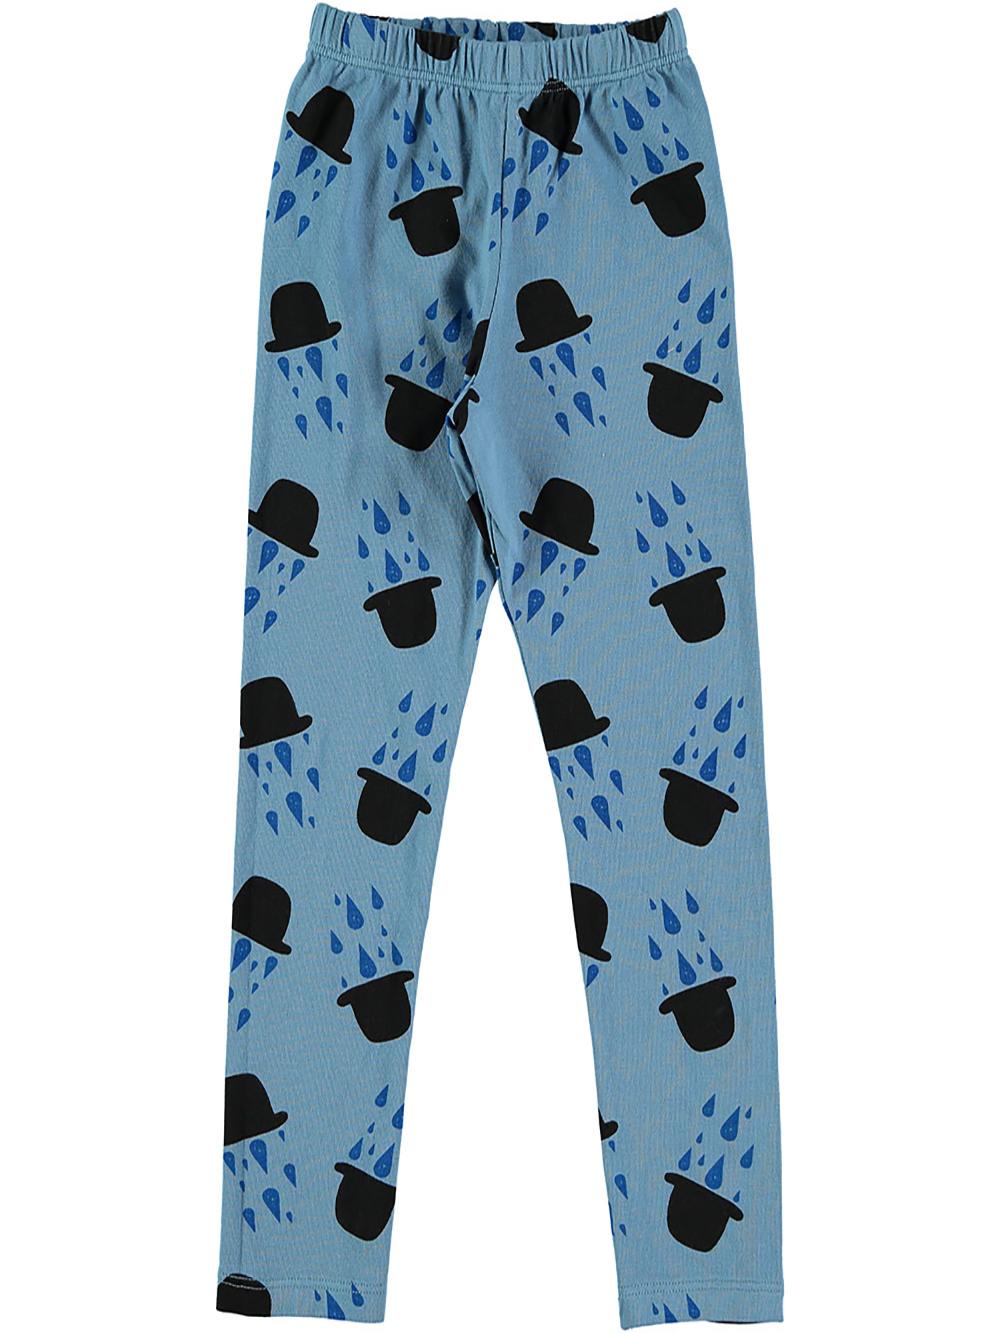 BLUE TIGHTS WITH HATS AND DROPS PRINT